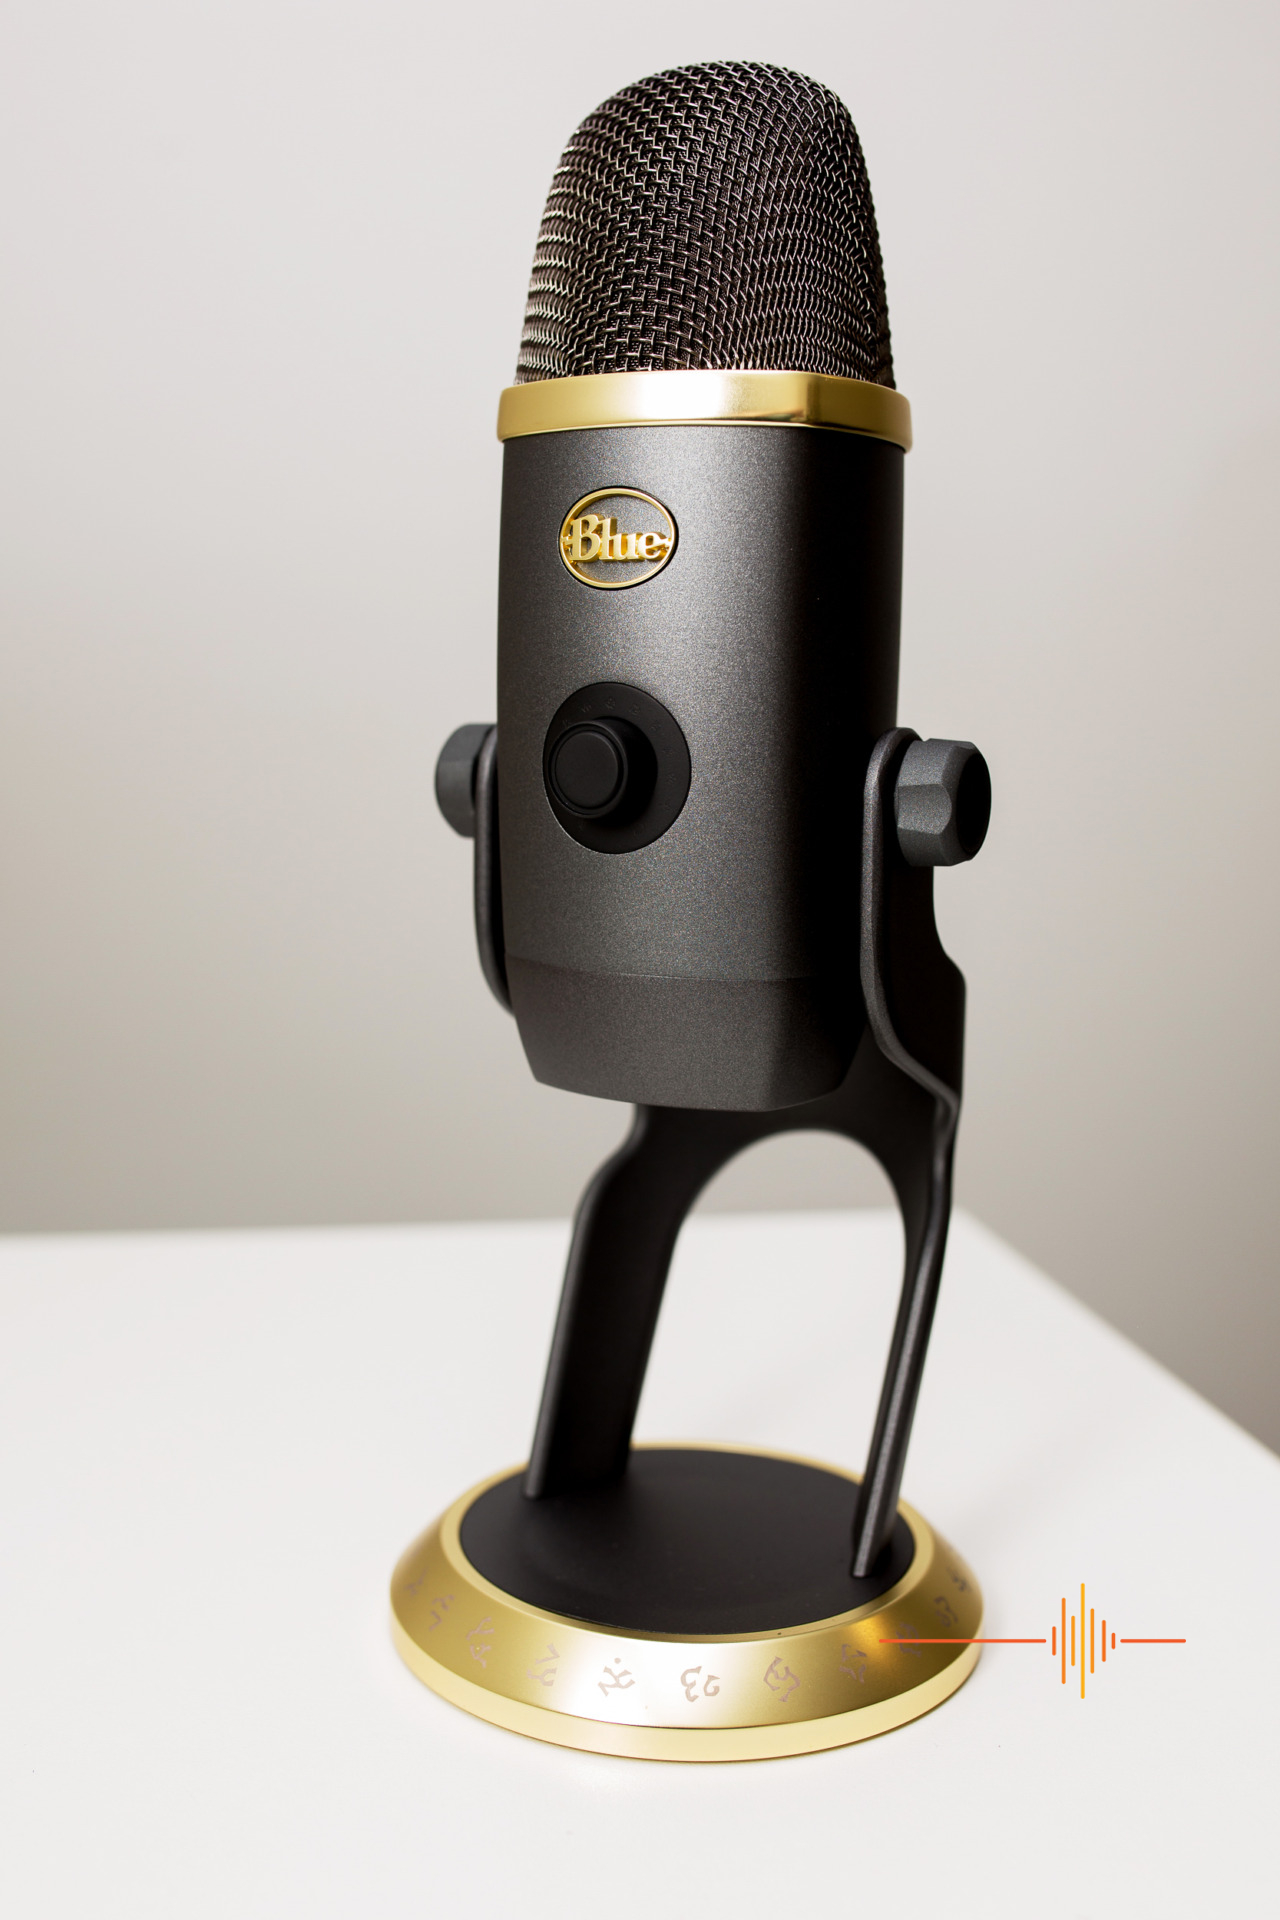 In Collaboration with Blizzard Entertainment®, Blue Microphones Introduces  Yeti X World of Warcraft® Edition with Voice Modulation Effect & HD Samples